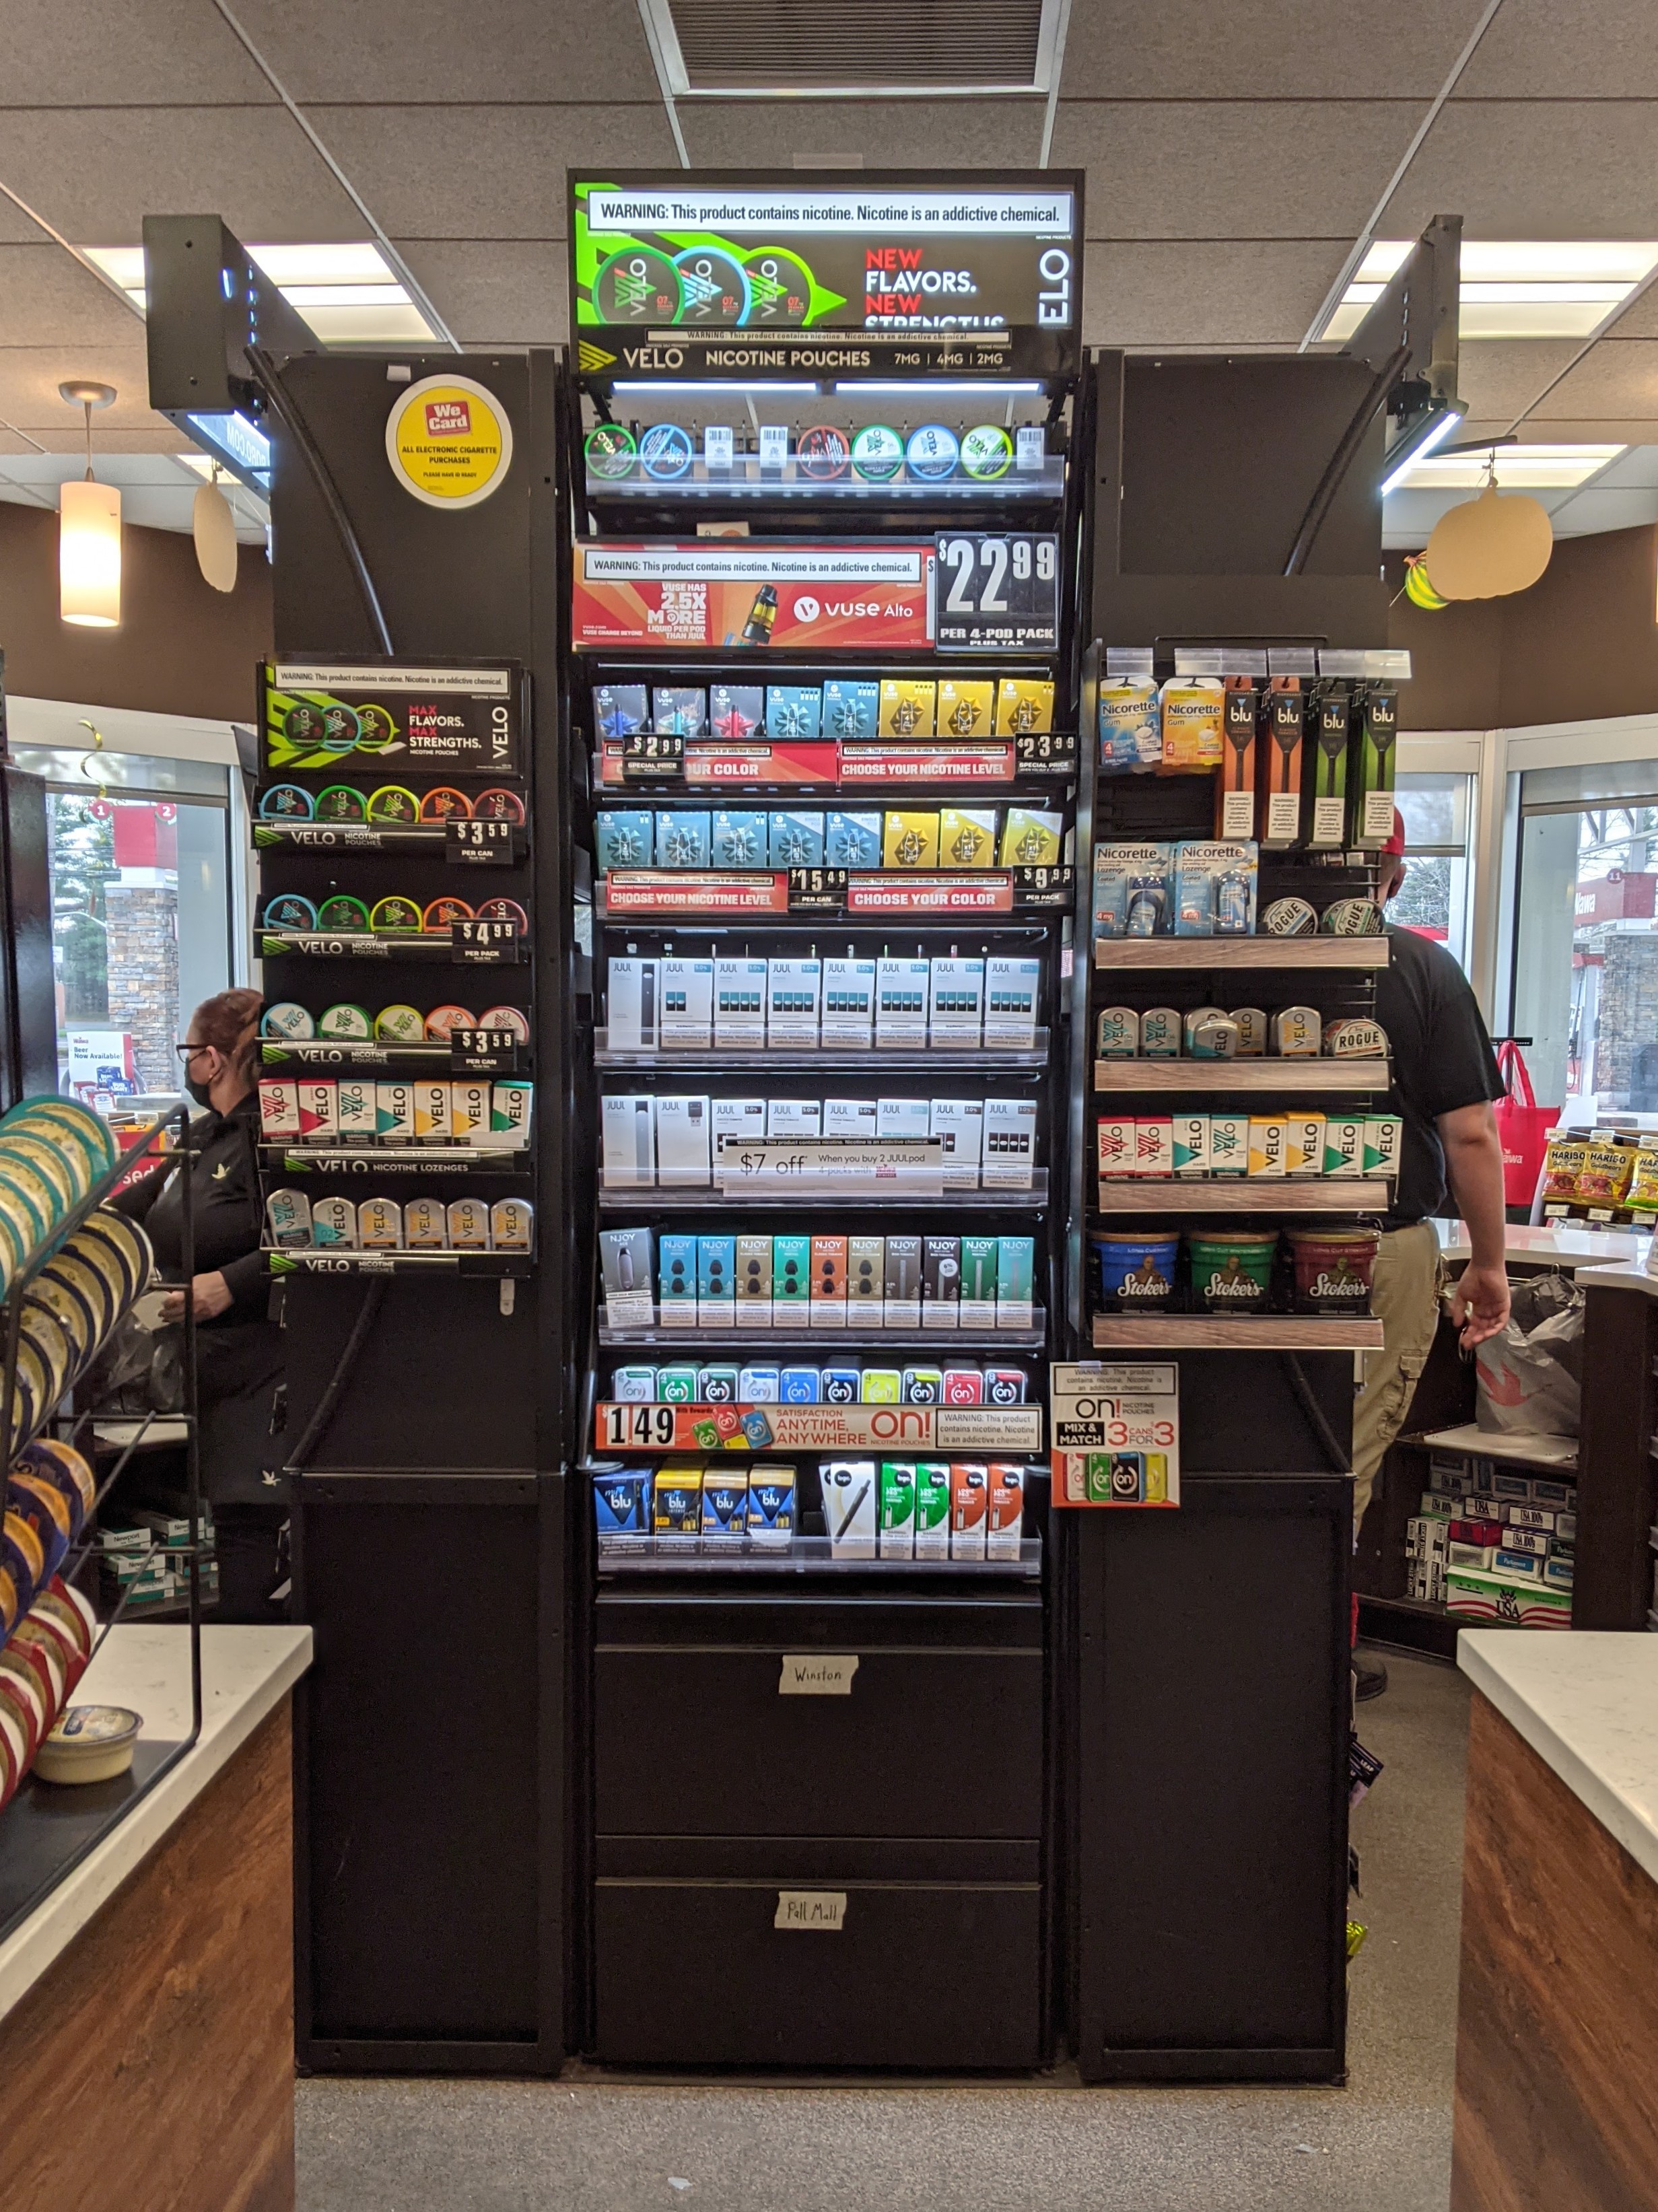 display of flavored oral nicotine products and e-cigarettes